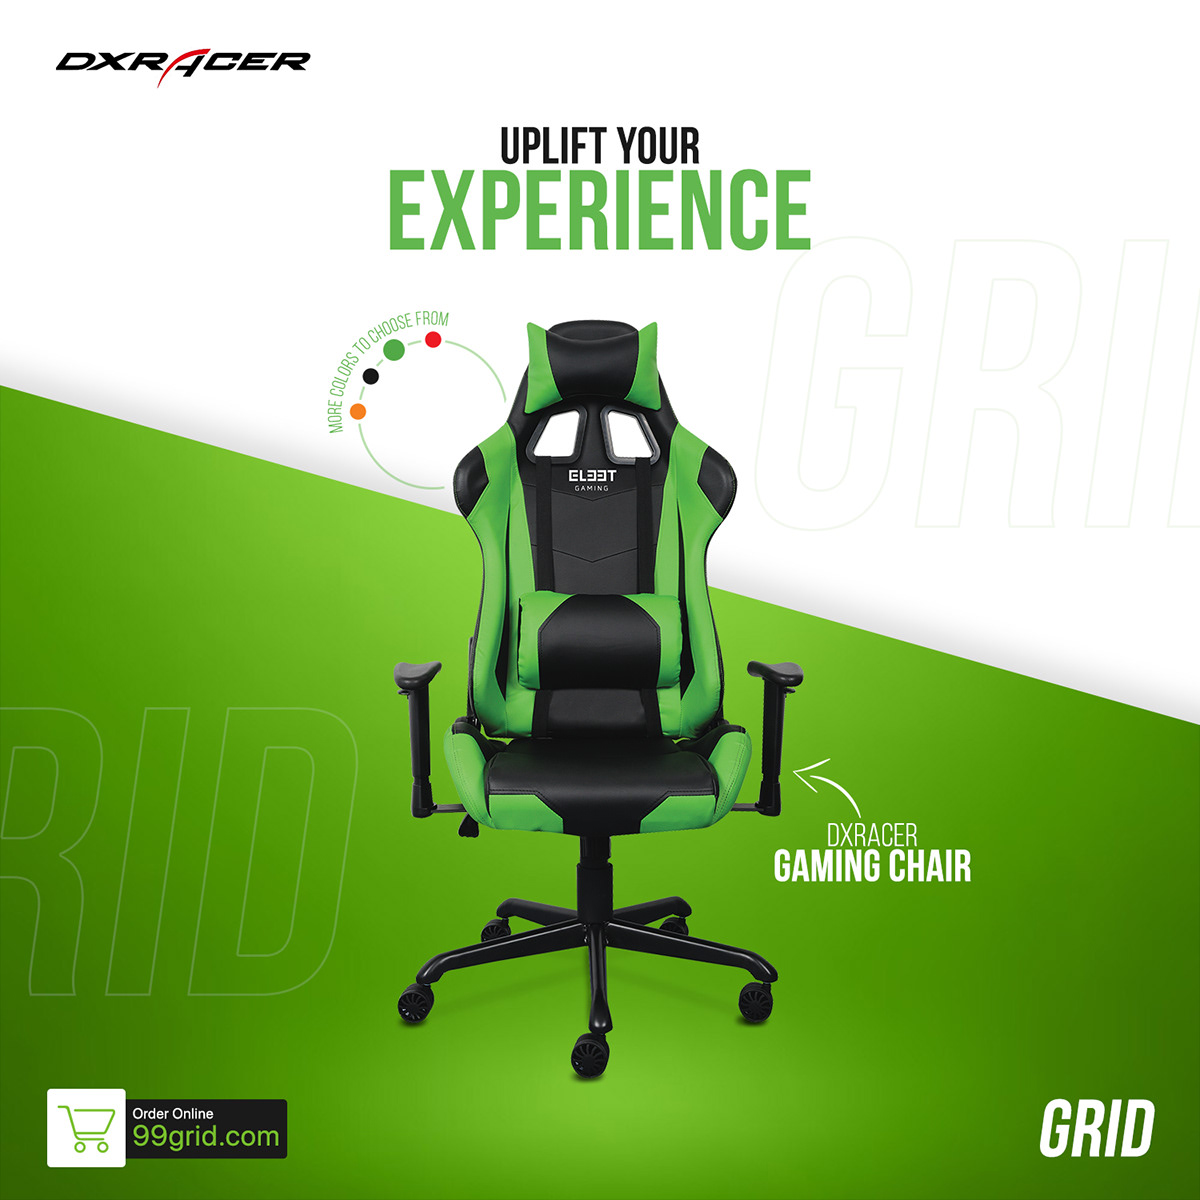 ad advertisement Advertising  chair furniture Gaming Gaming chair grid